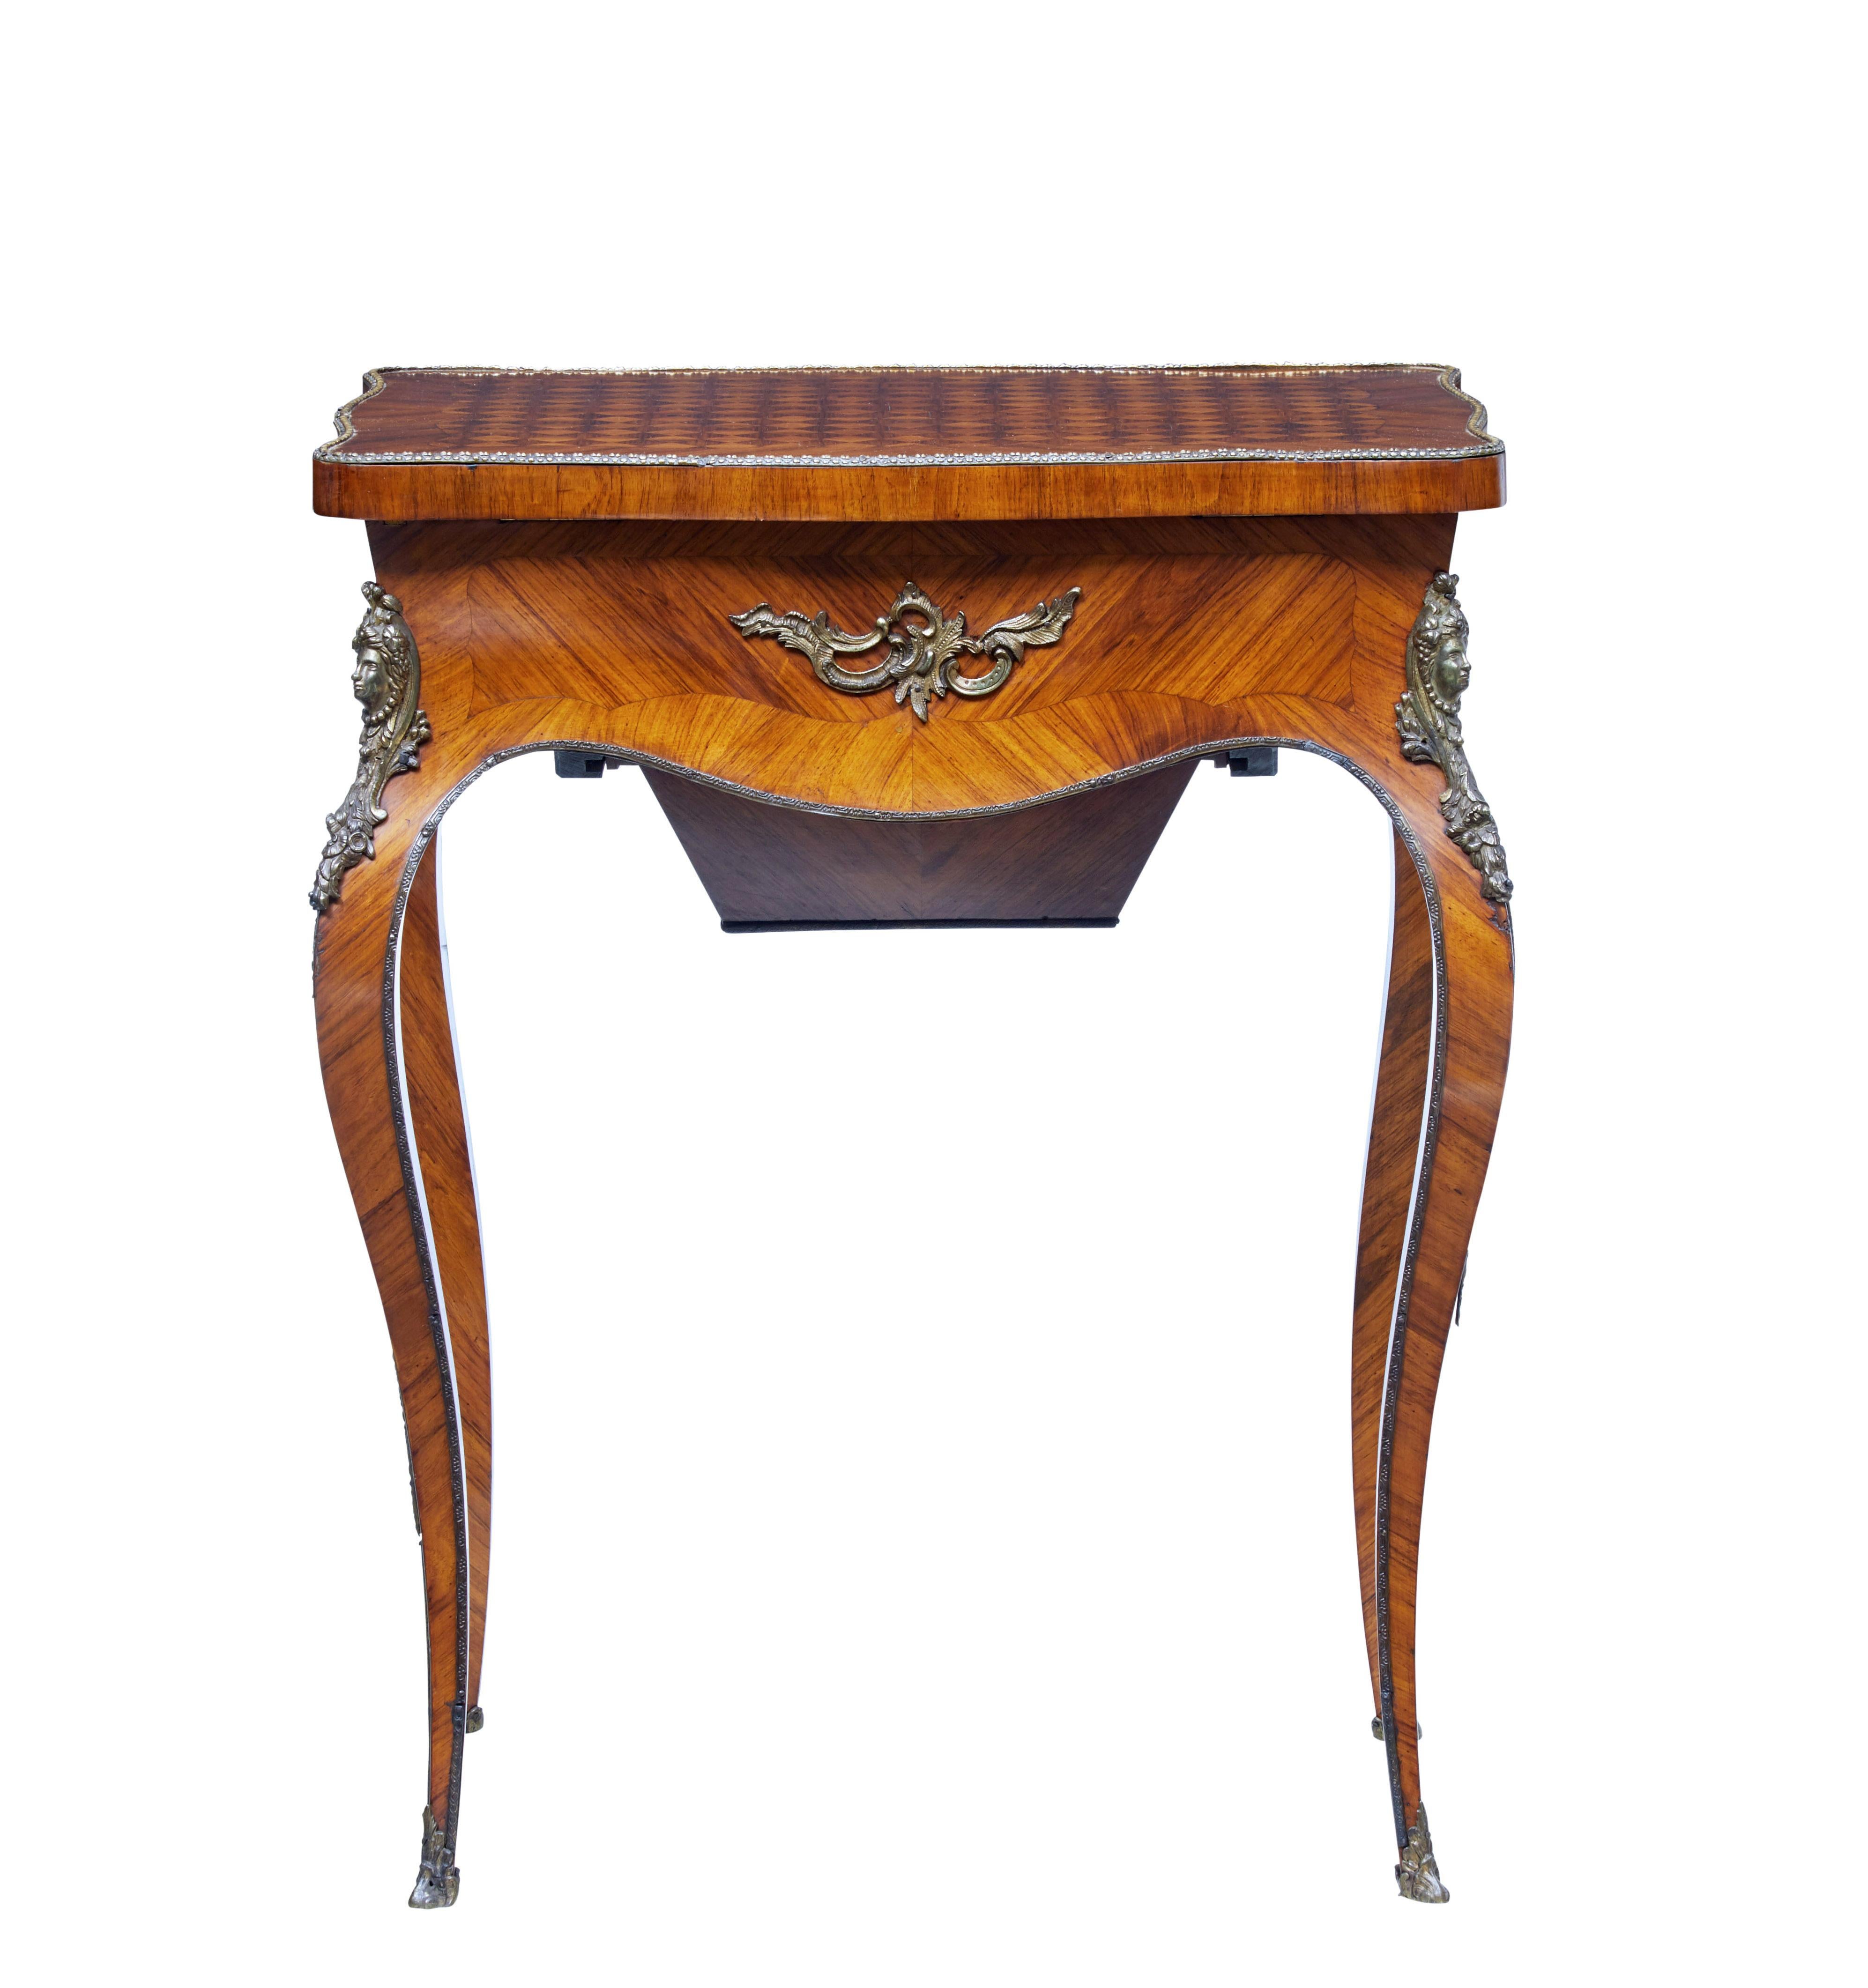 19th century French kingwood sewing work table In Good Condition For Sale In Debenham, Suffolk